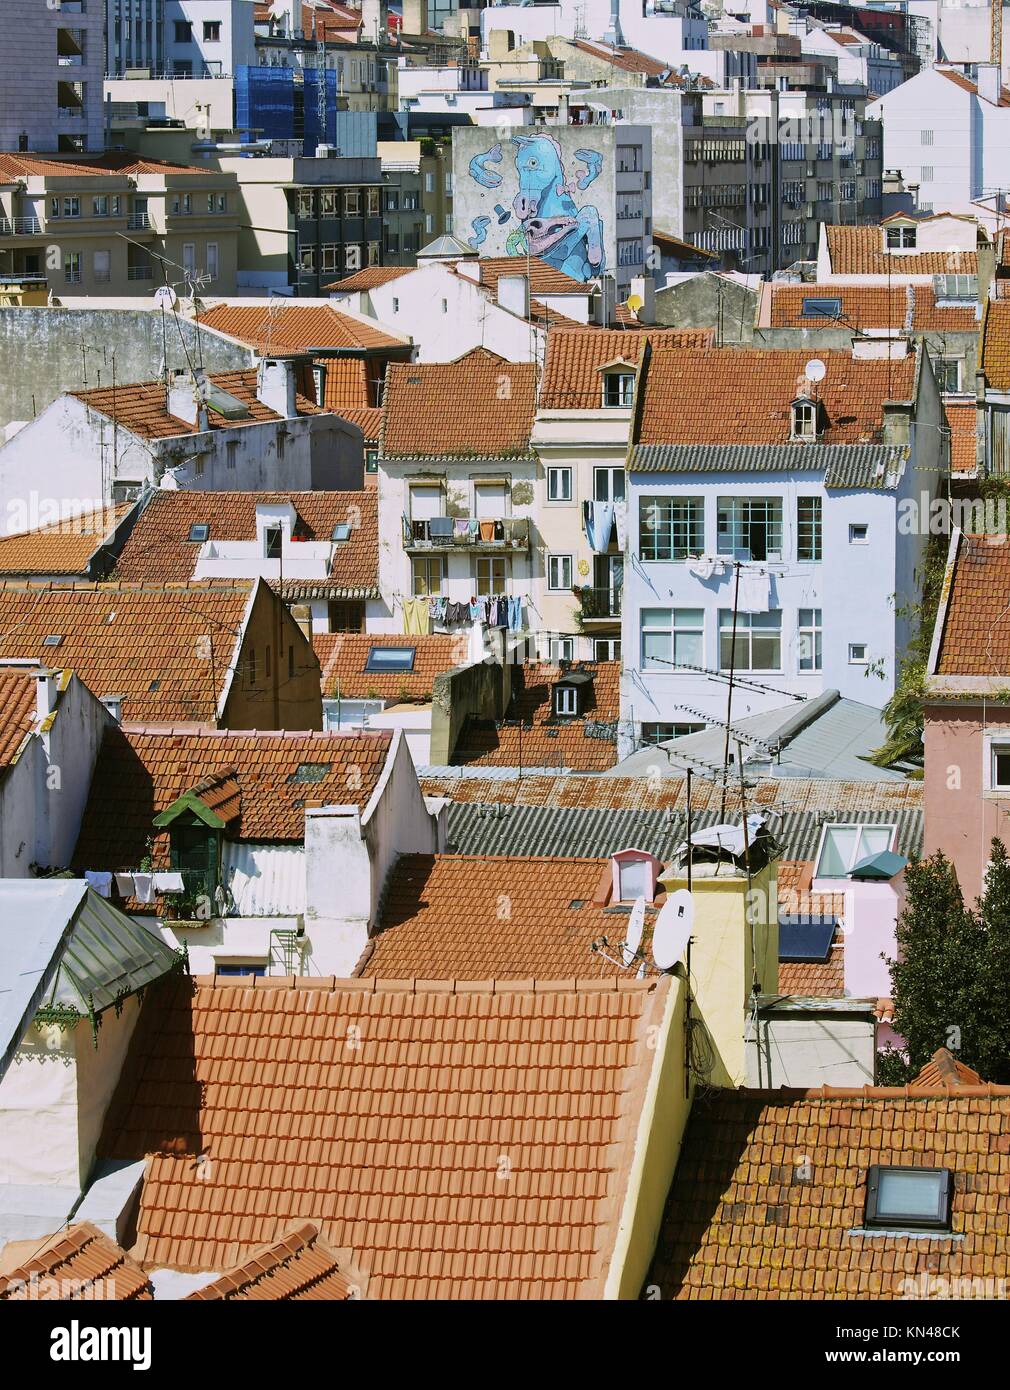 Urban landscape from the Jardim do Torel viewpoint, Lisbon, Portugal, western Europe. Stock Photo